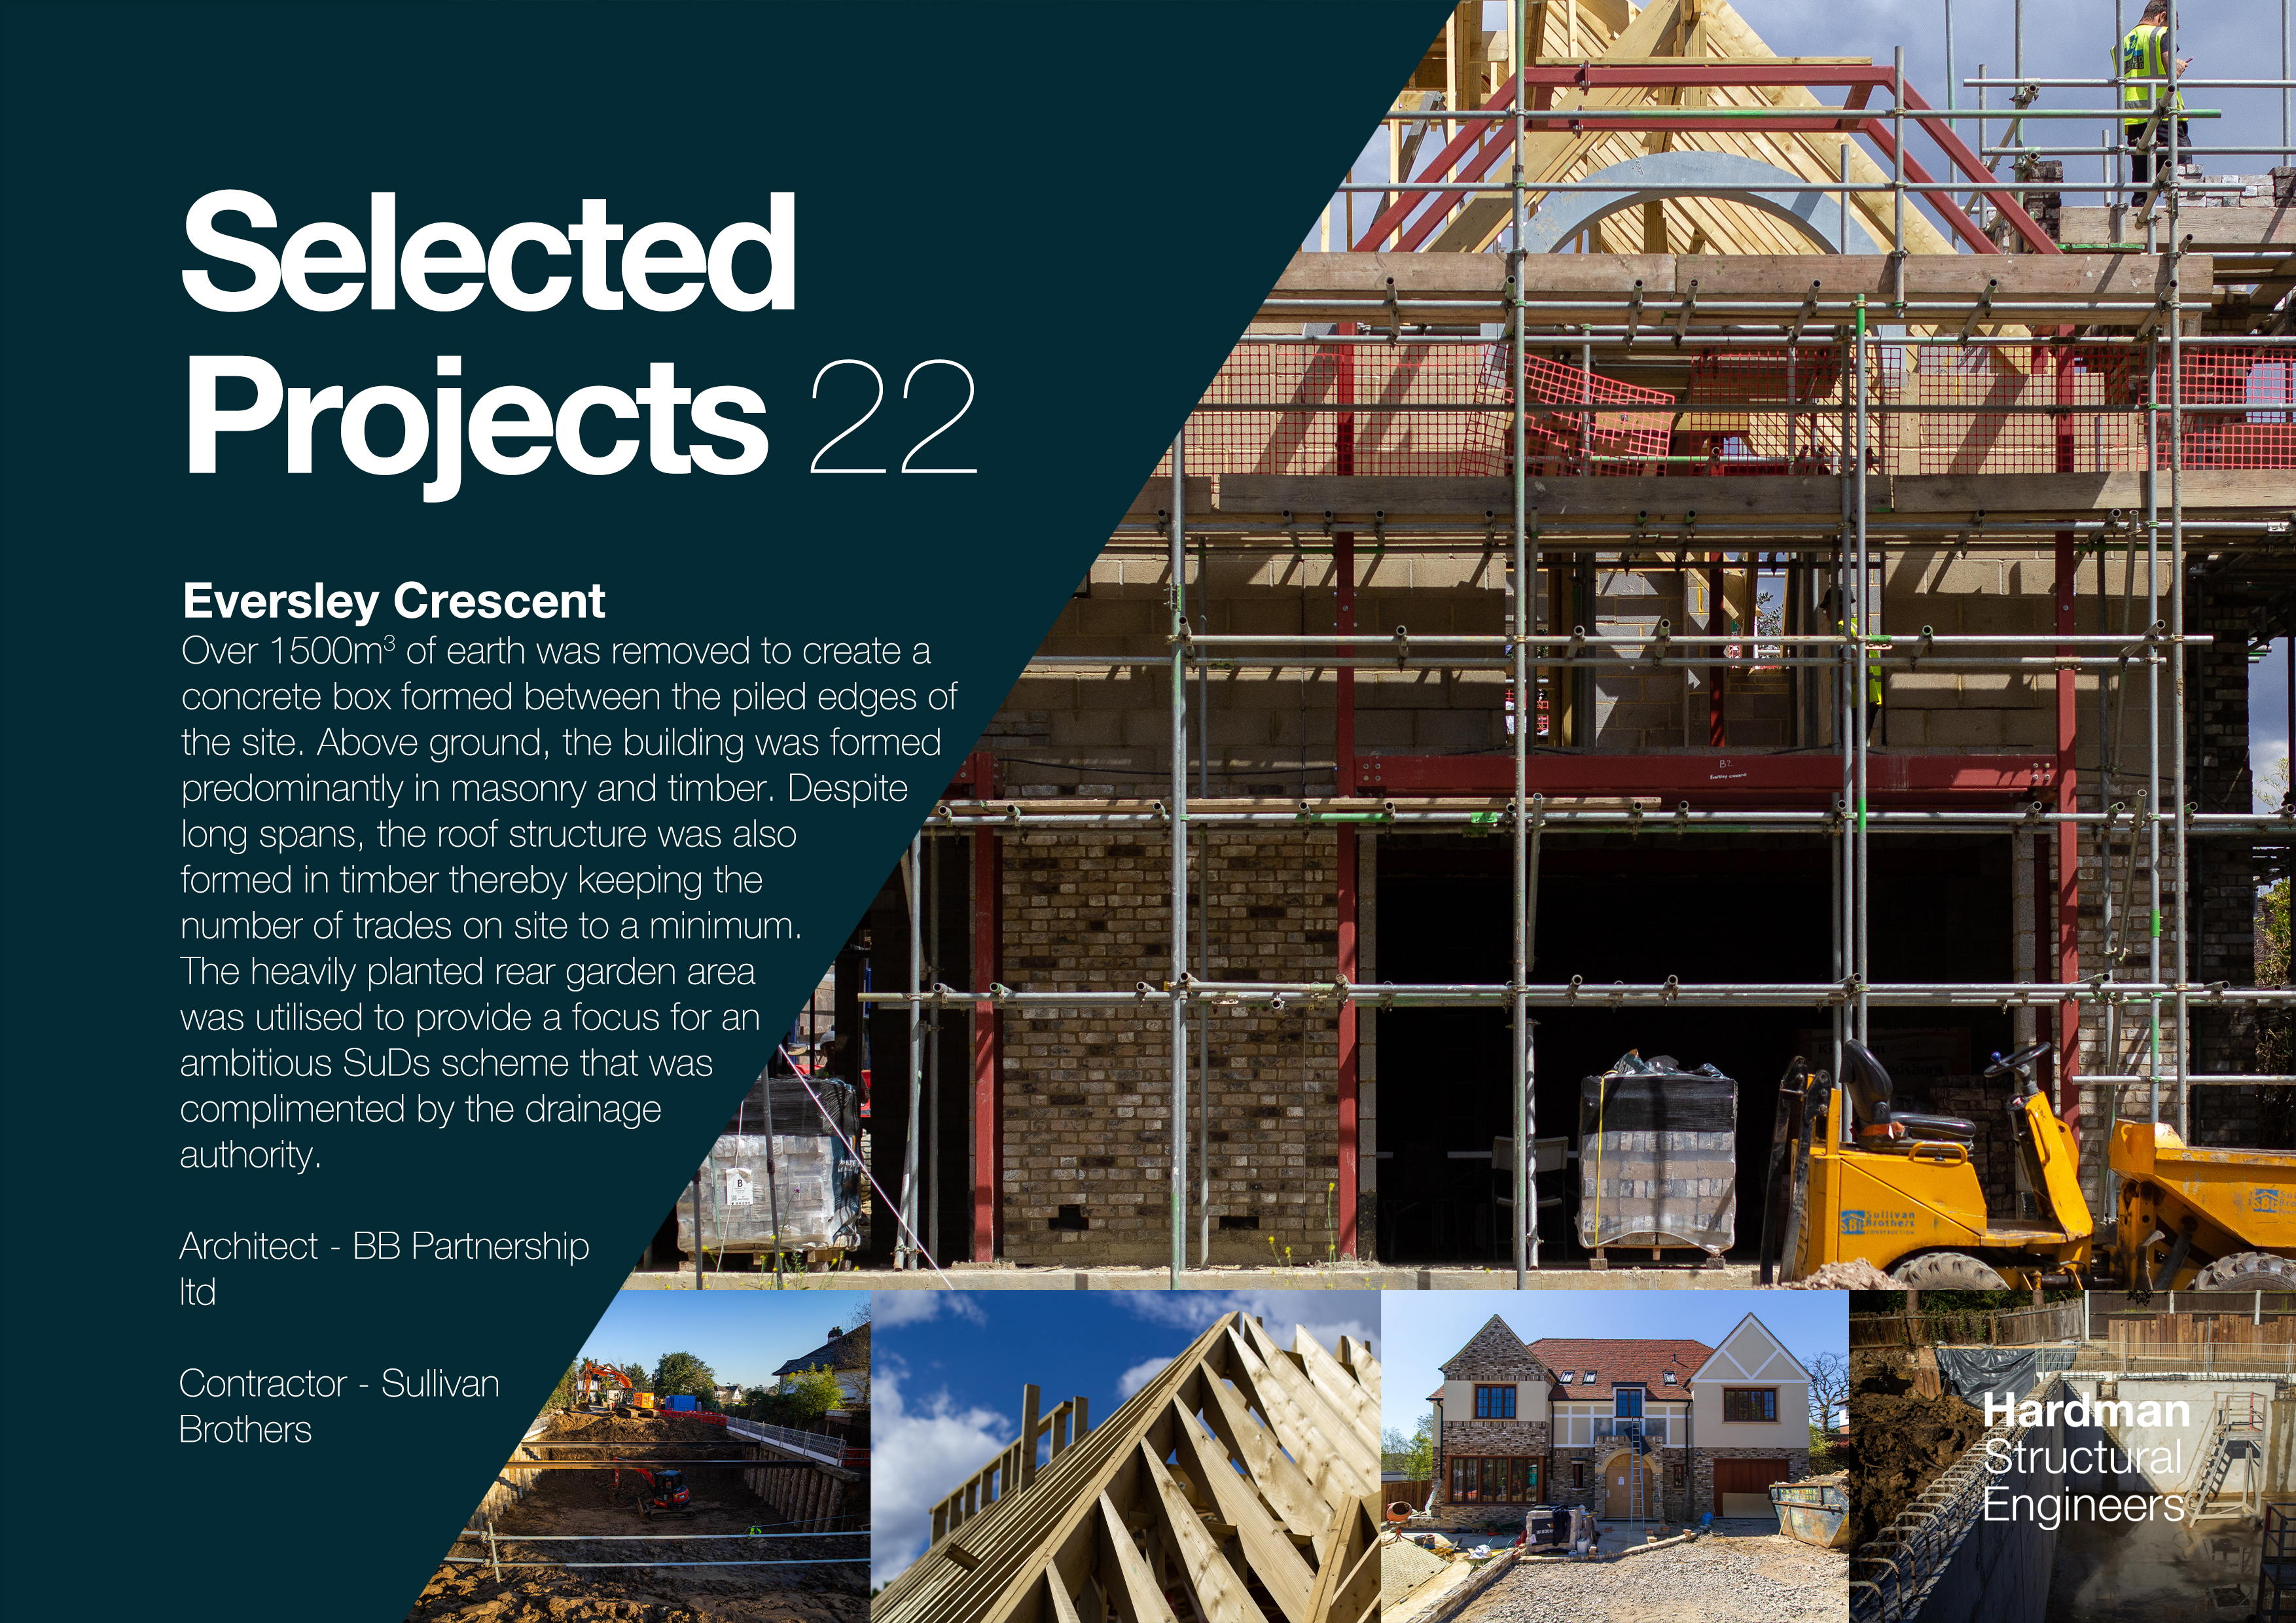 Selected Projects - Eversley Crescent